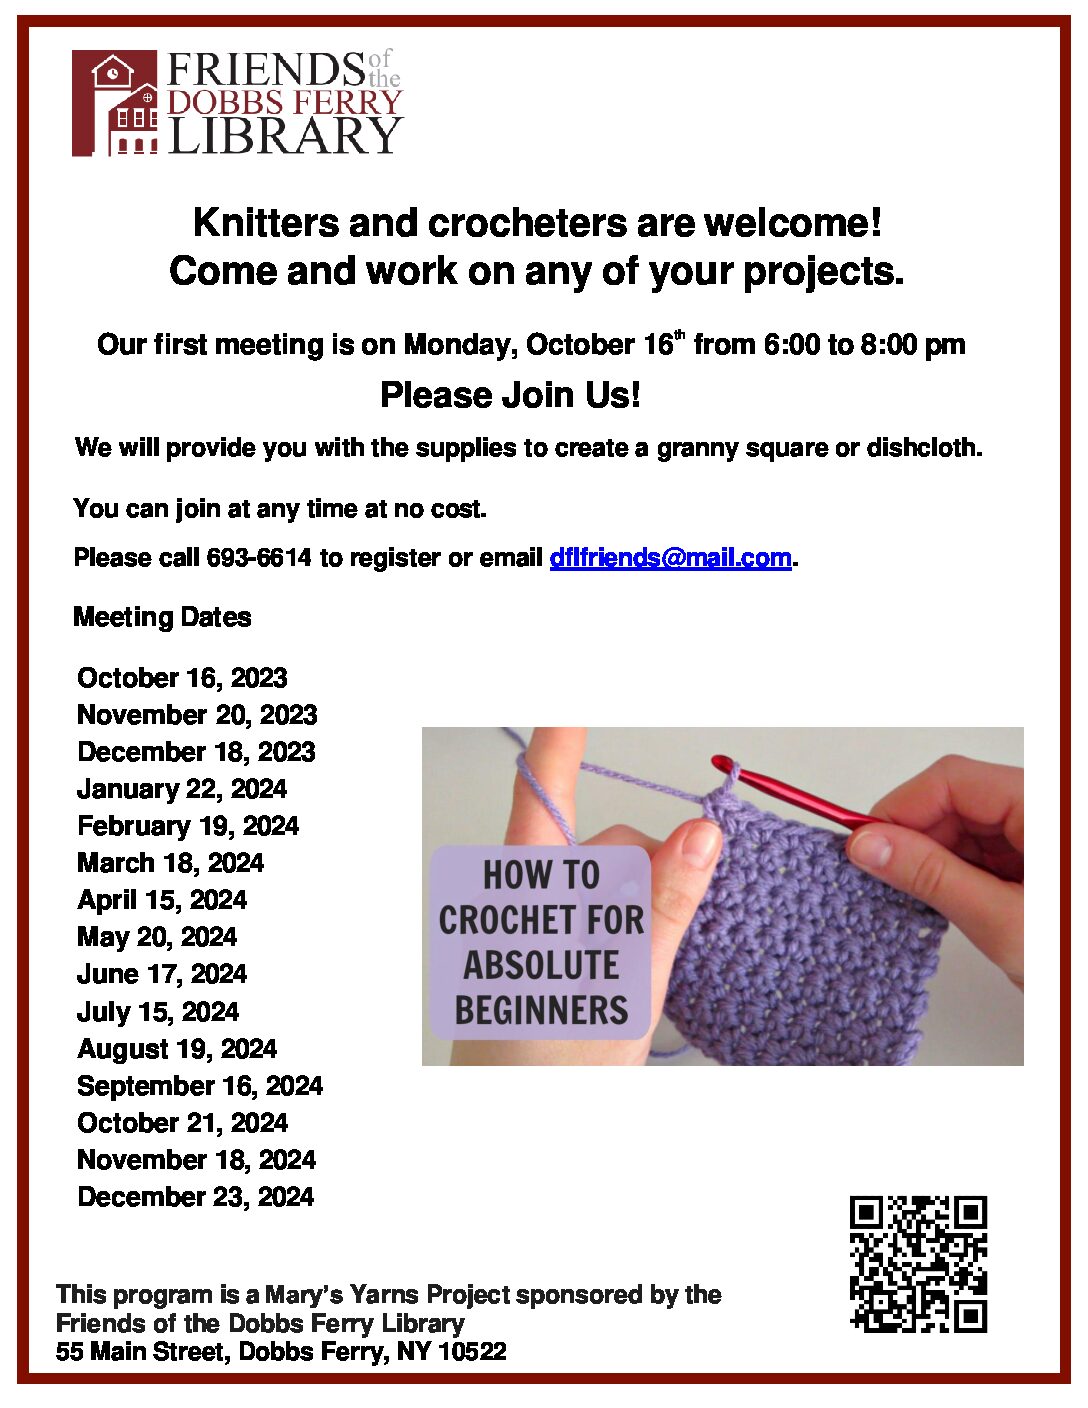 Mary's Yarns Crafting Group - Knitters and Crocheters